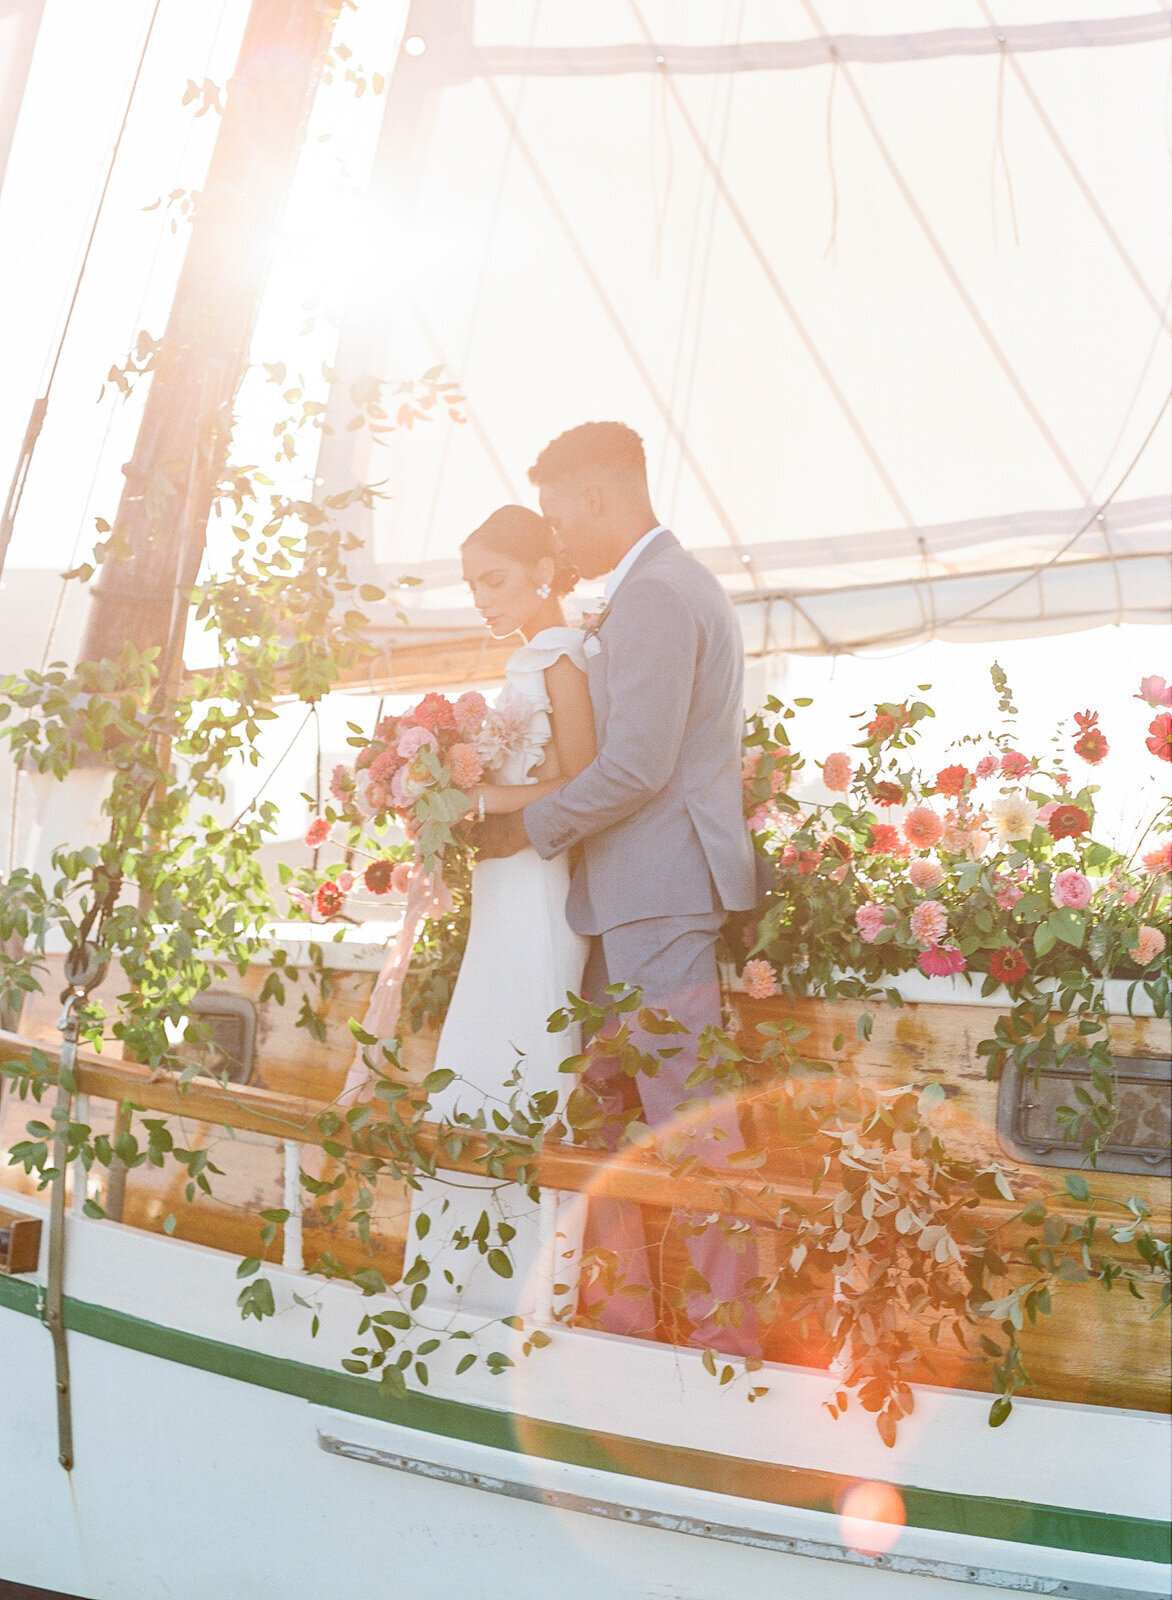 Kate-Murtaugh-Events-elopement-wedding-planner-Boston-Harbor-sailing-sail-boat-yacht-greenery-floral-installation-golden-hour-sunset-couple